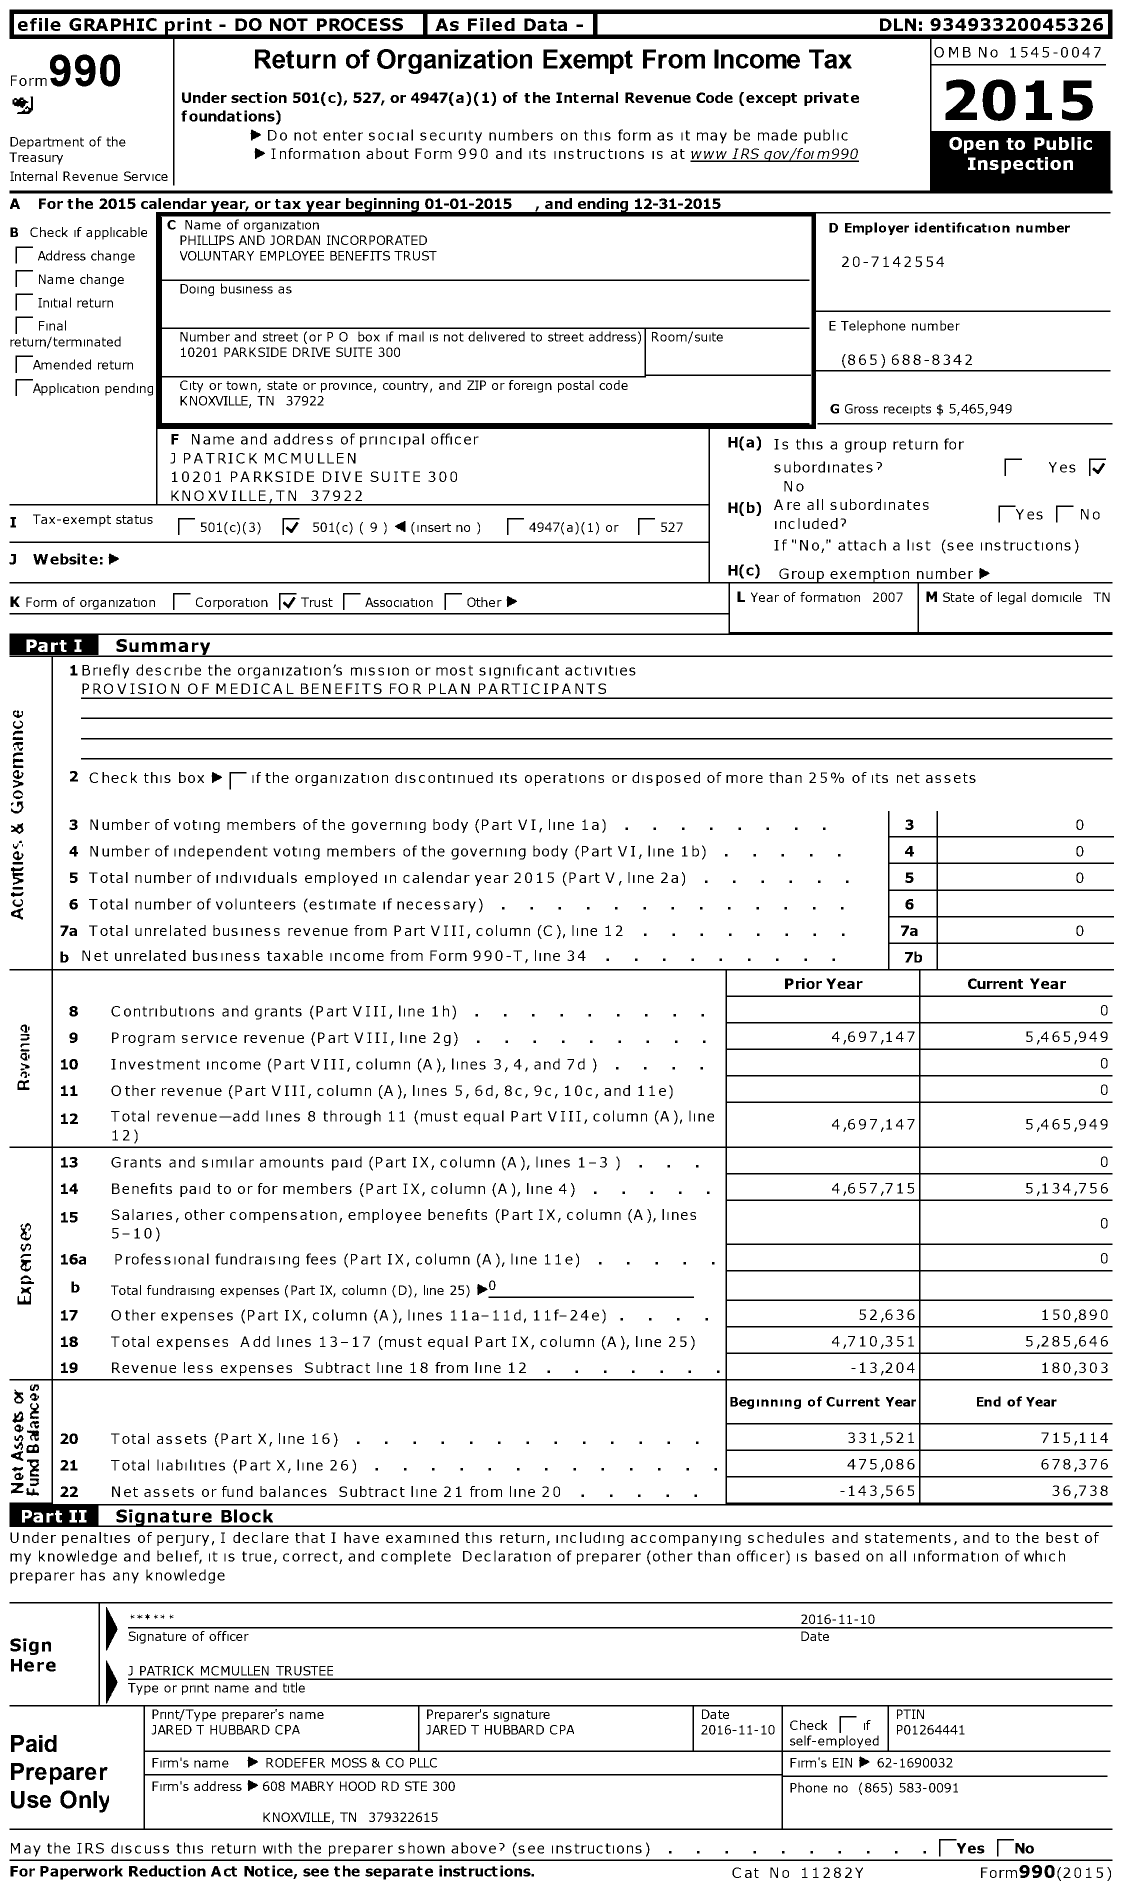 Image of first page of 2015 Form 990O for Phillips and Jordan Incorporated Voluntary Employee Benefits Trust